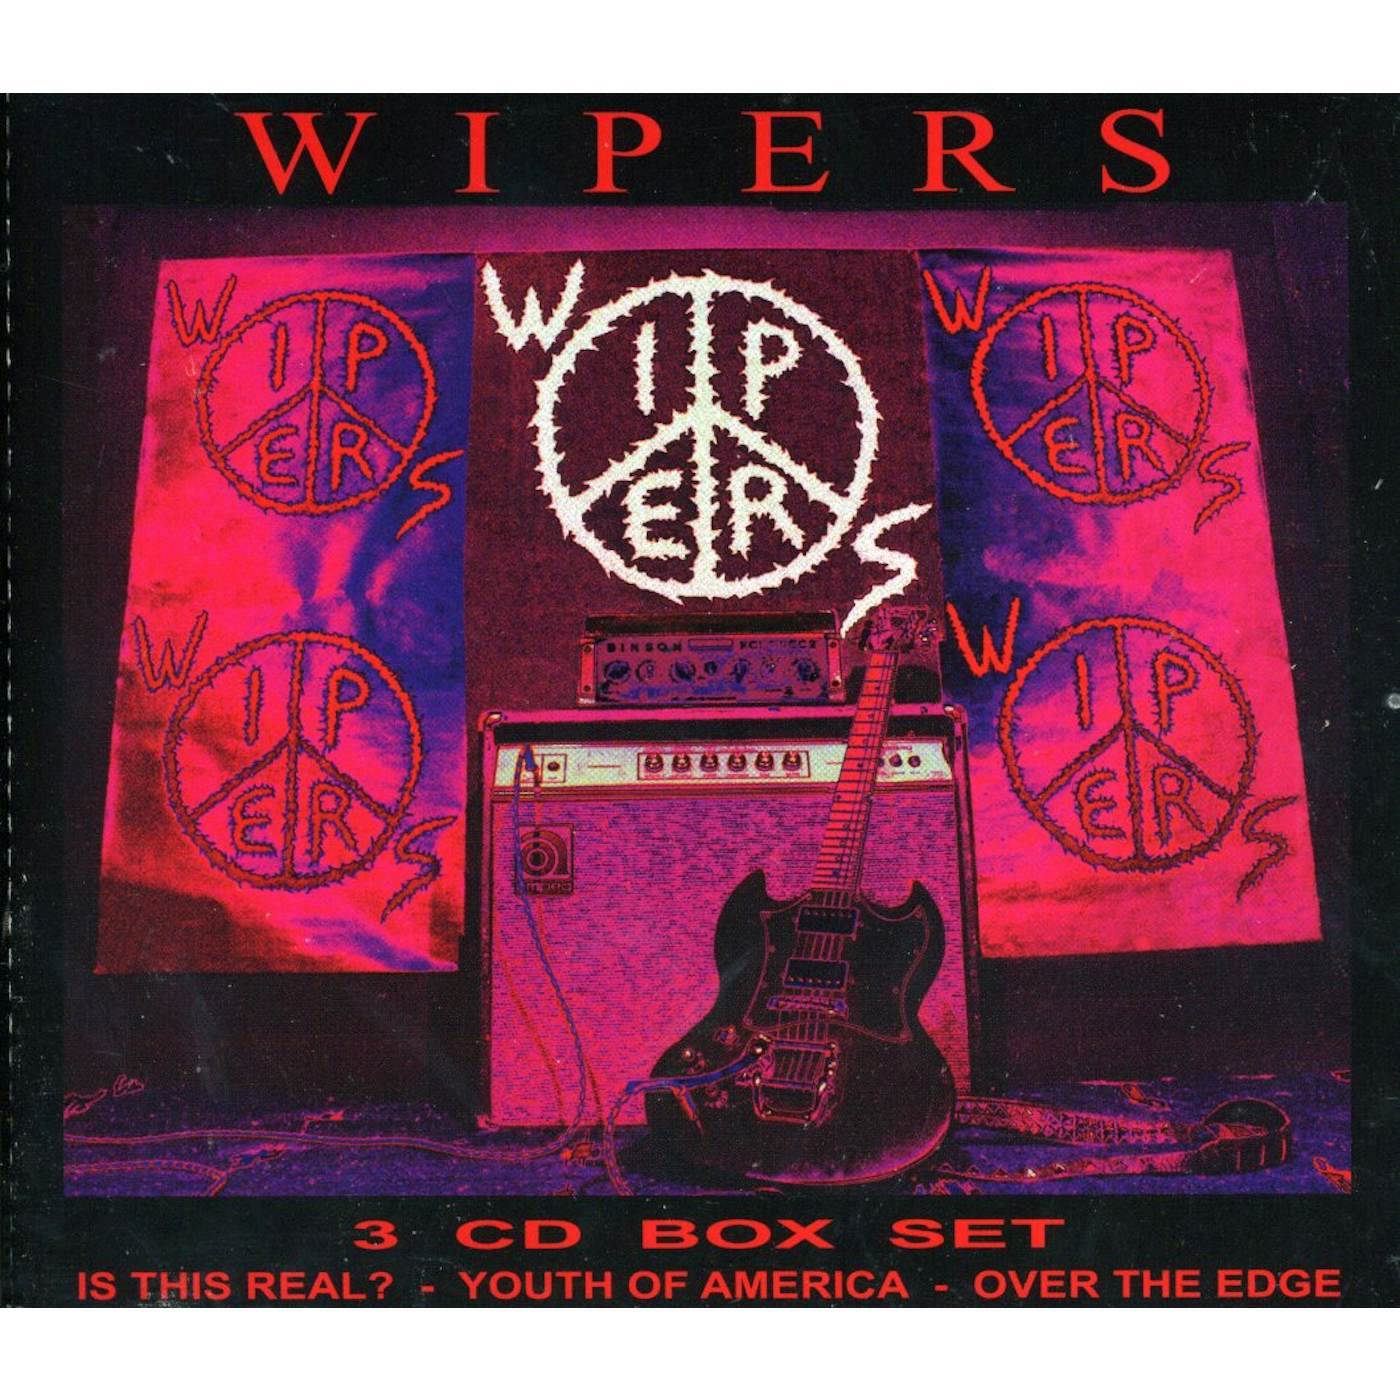 Wipers Box Set (Is This Real? - Youth Of America - Over The Edge) CD